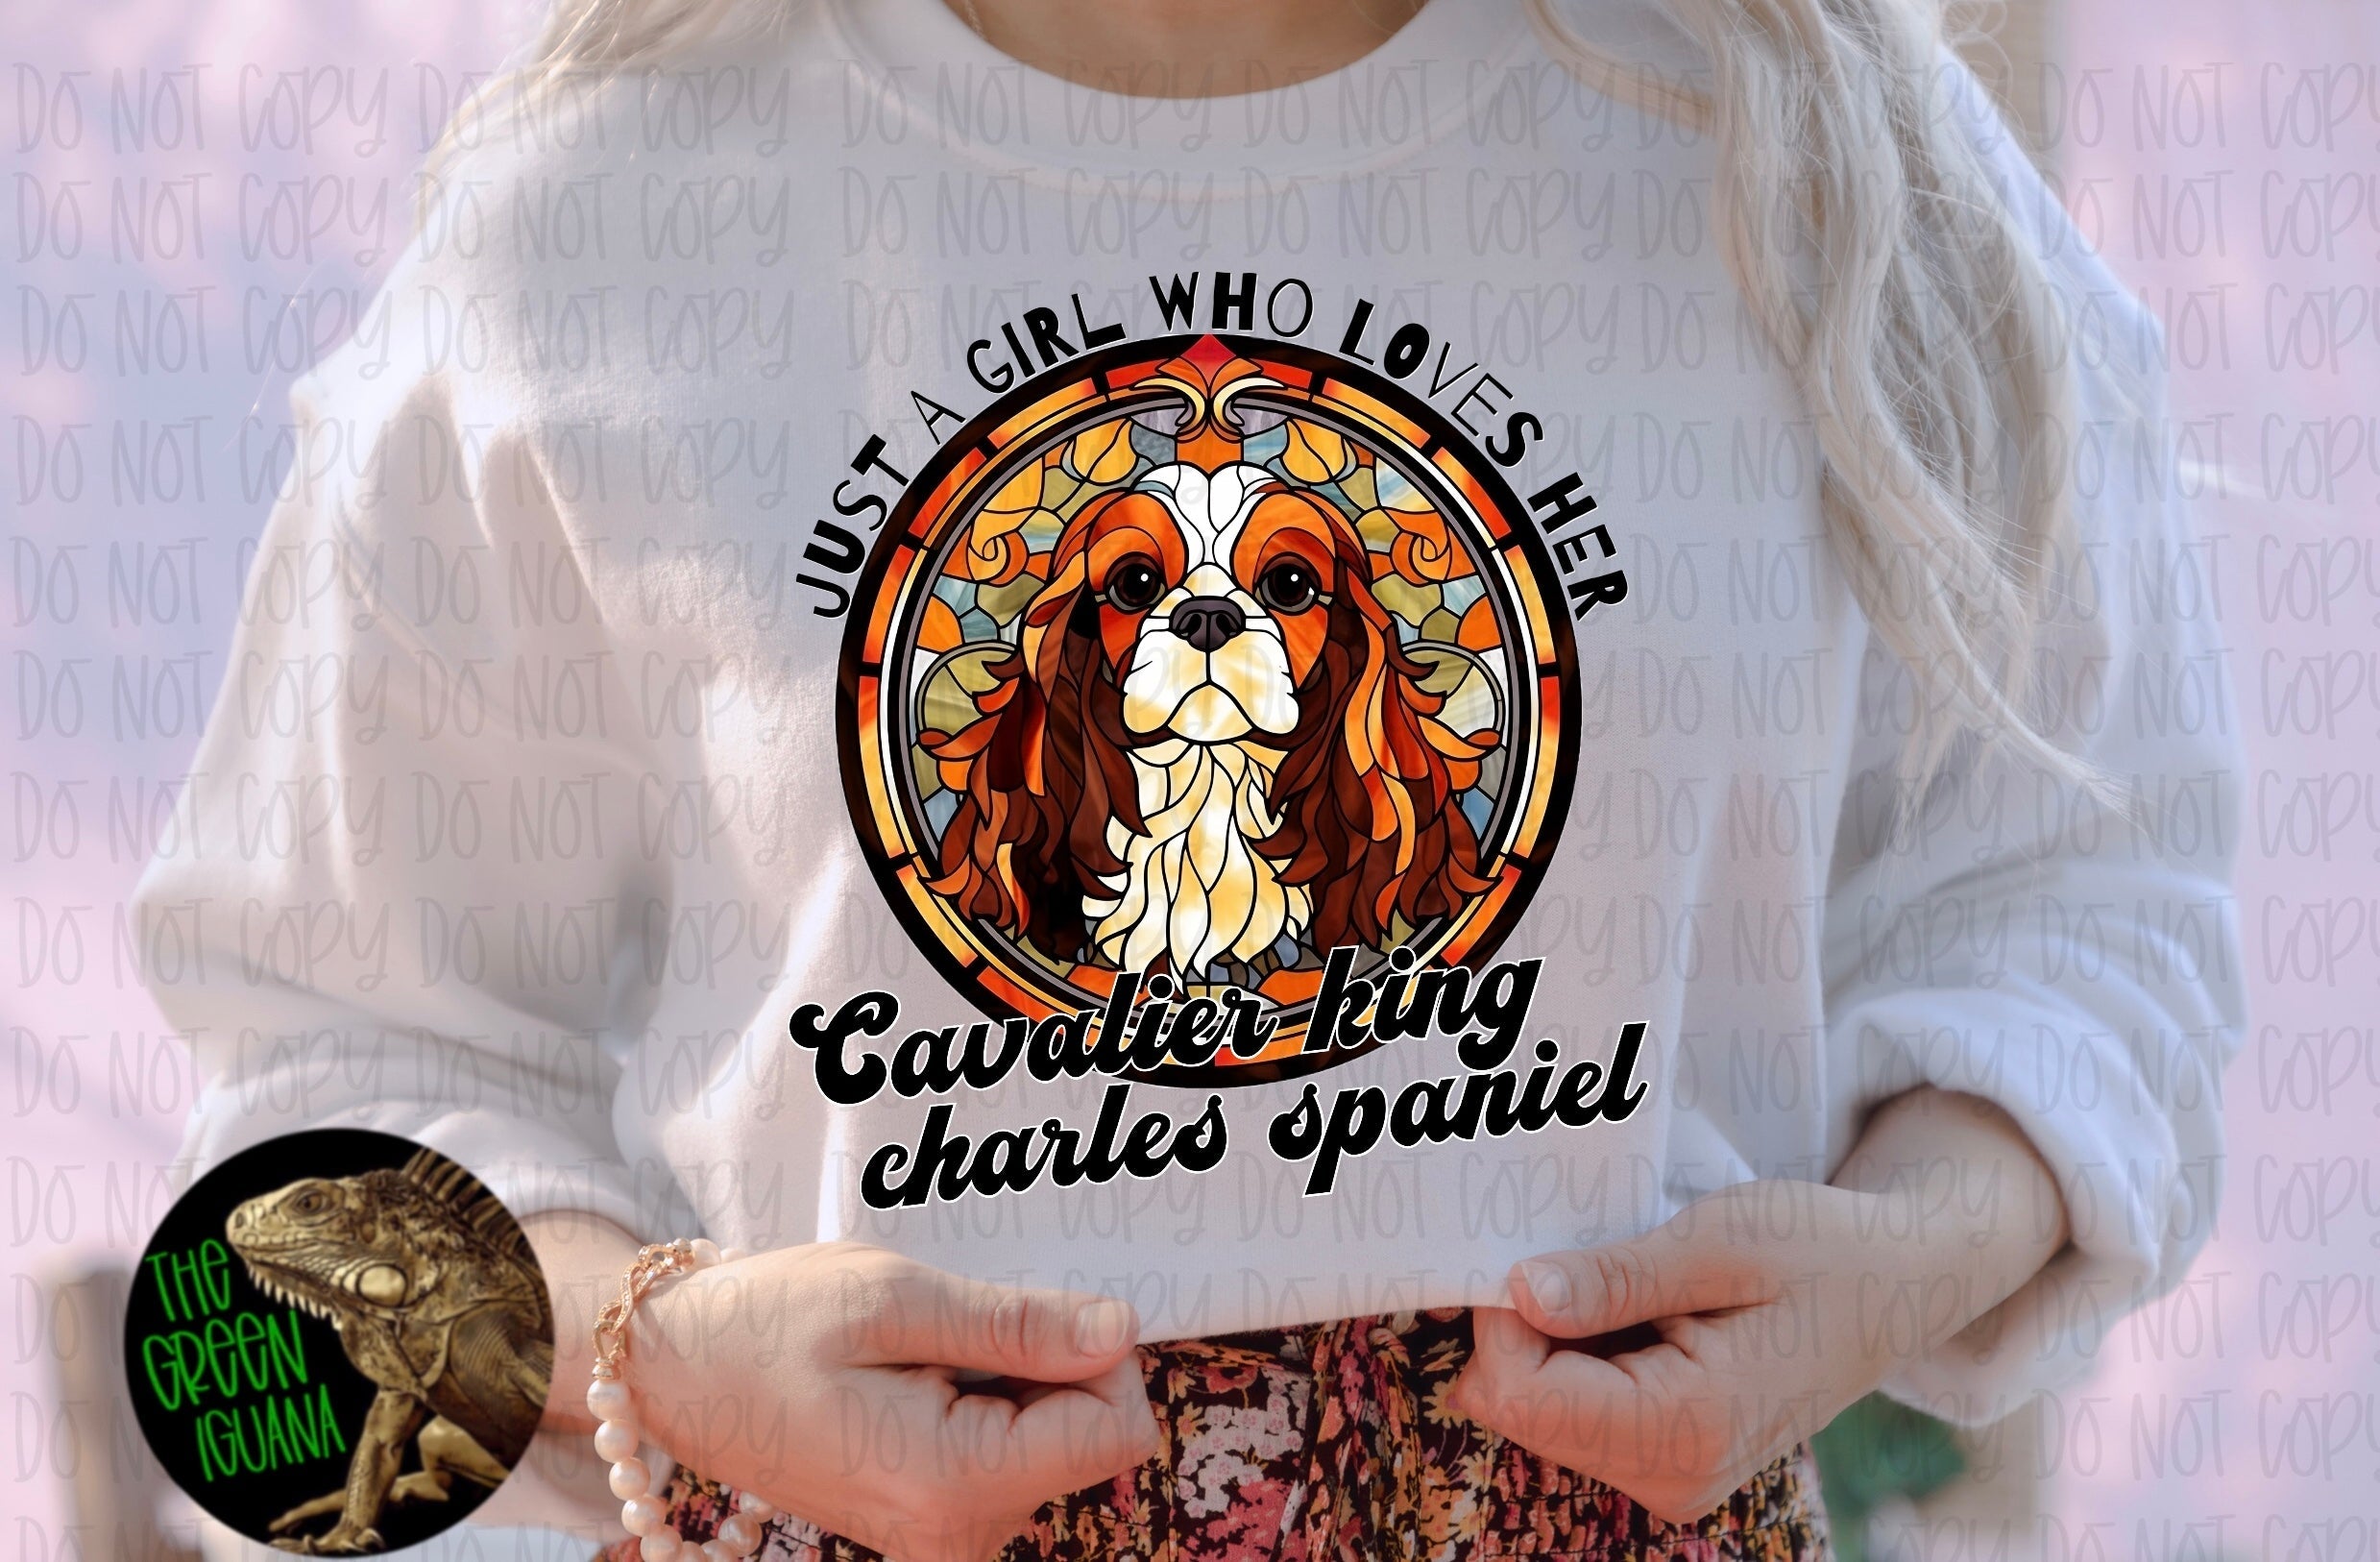 Just a girl who loves her Cavalier King Charles spaniel